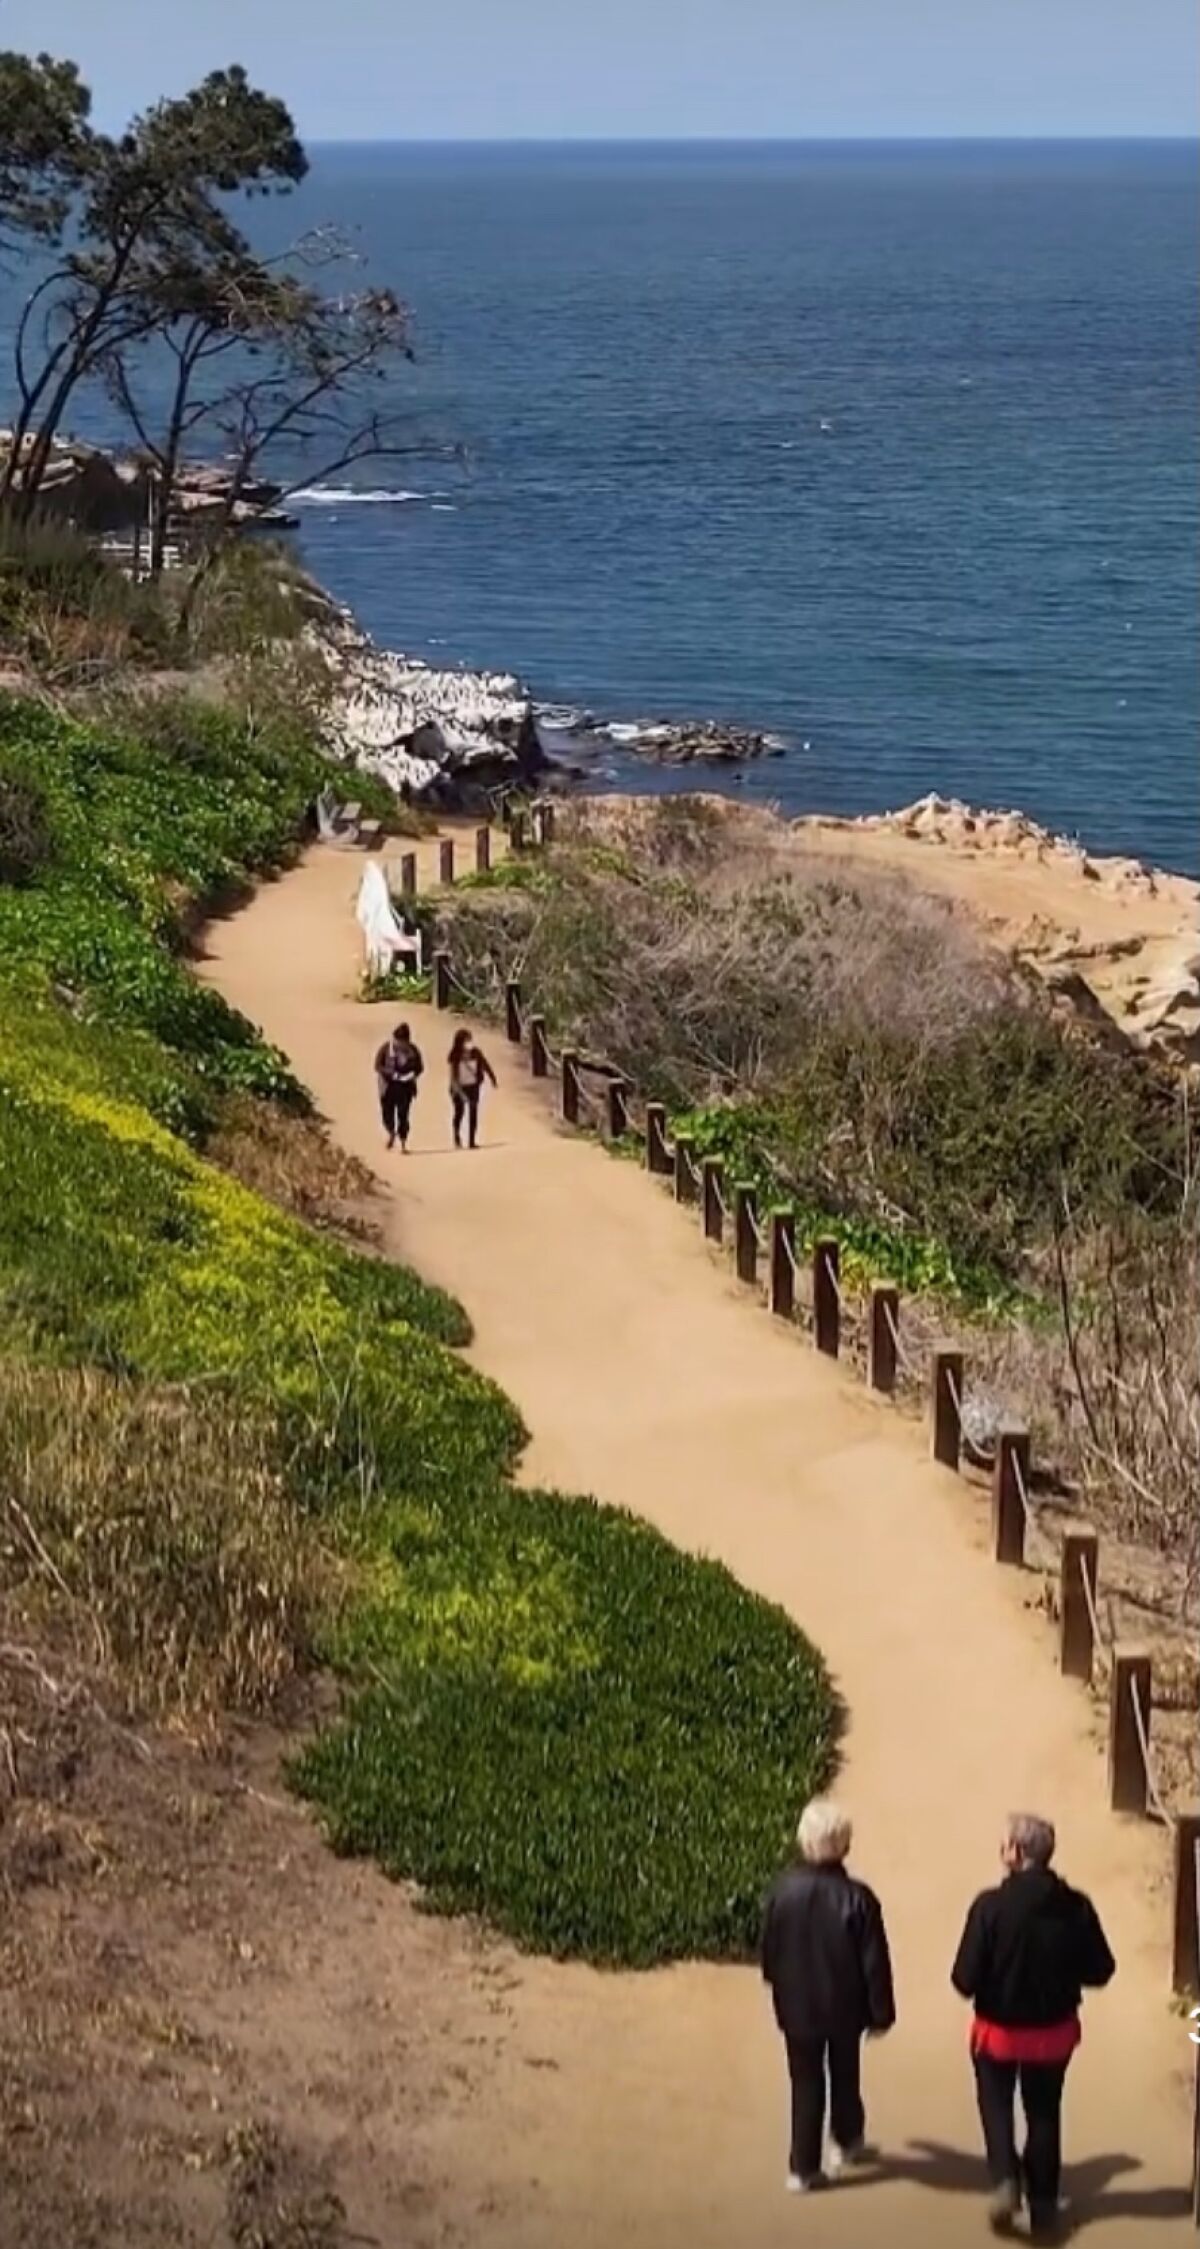 Coast Walk Trail in La Jolla is nominated for the Vernacular Architecture Forum Advocacy Award.